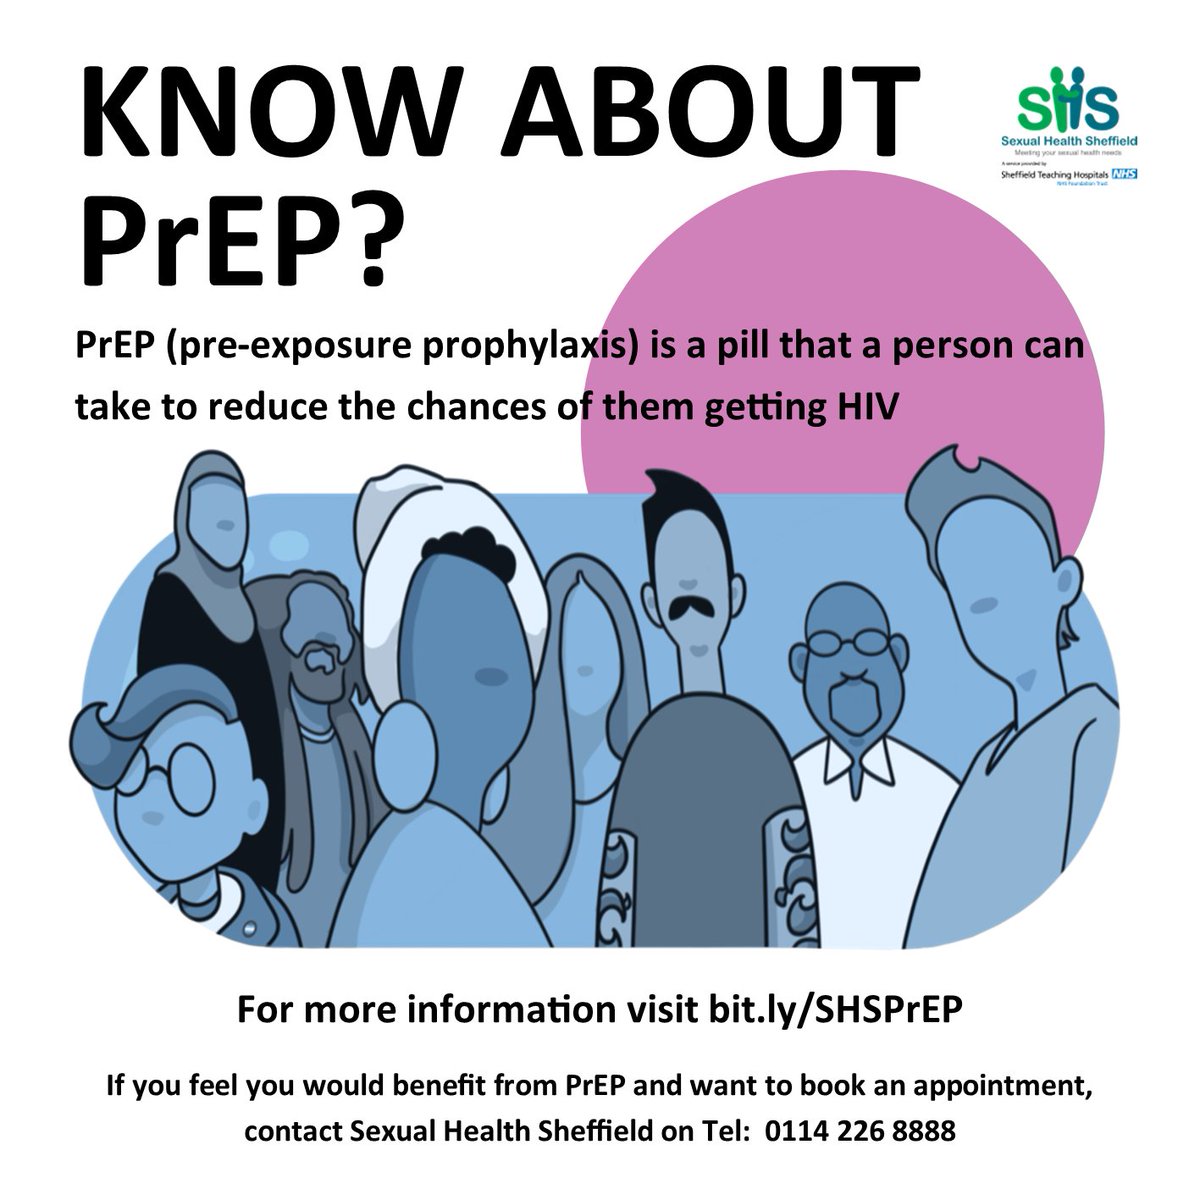 We're with @SheffCityofSanc at Victoria Hall today If you're visiting the drop-in, come and see us at our stall to find out more about sexual health services including #PrEP. You can also speak to us for information and advice on #STIs #HIVtesting and #sexualhealth support.